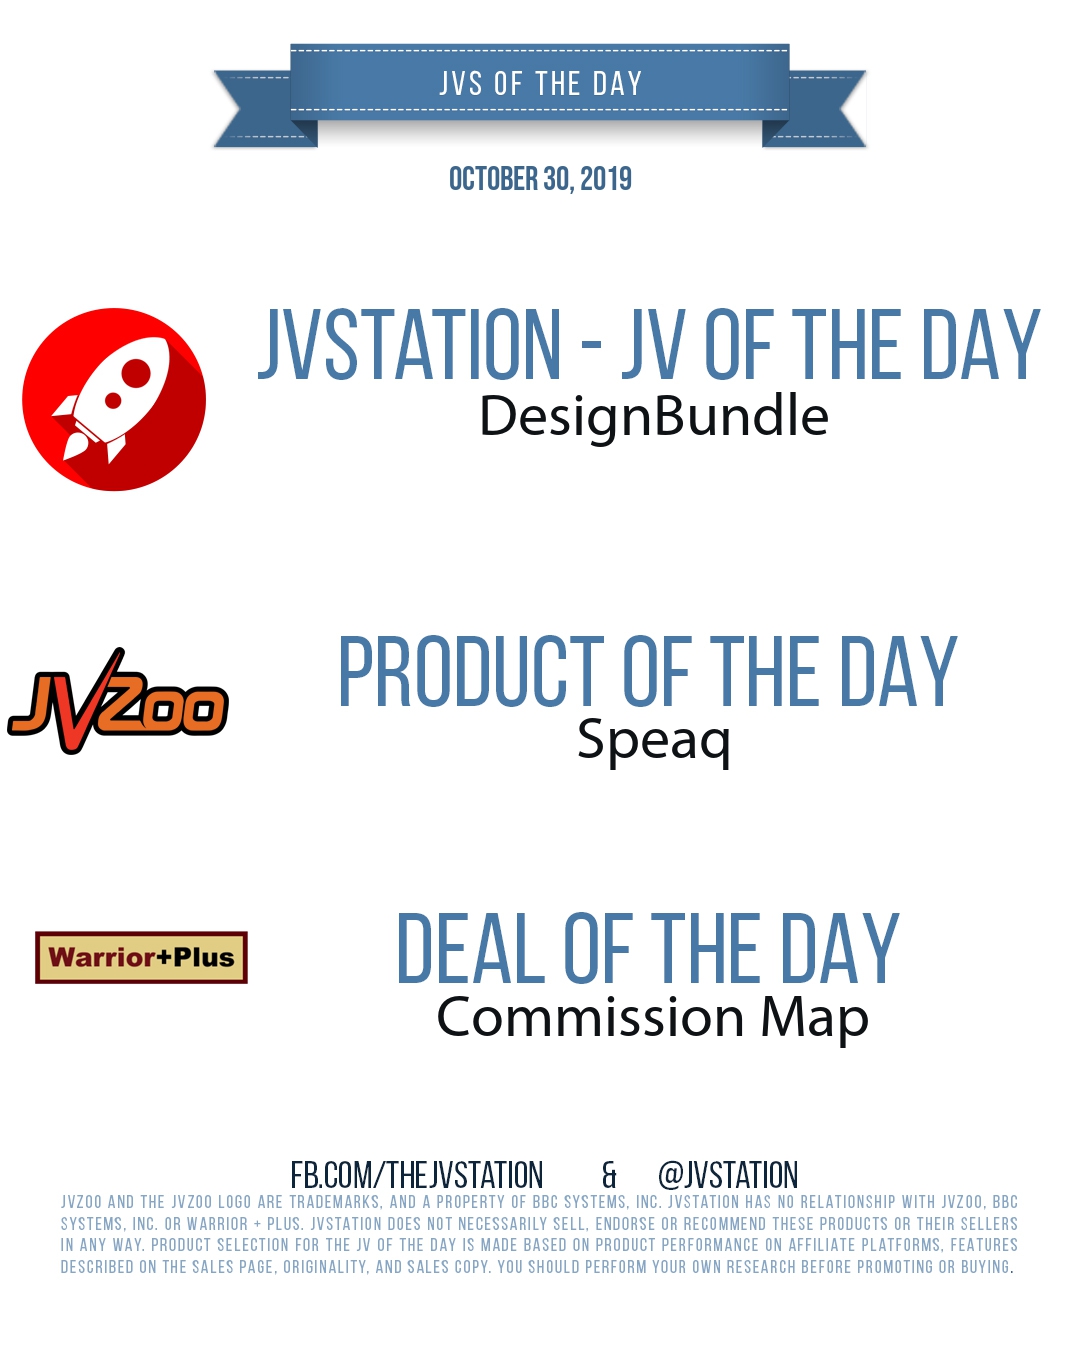 JVs of the day - October 30, 2019